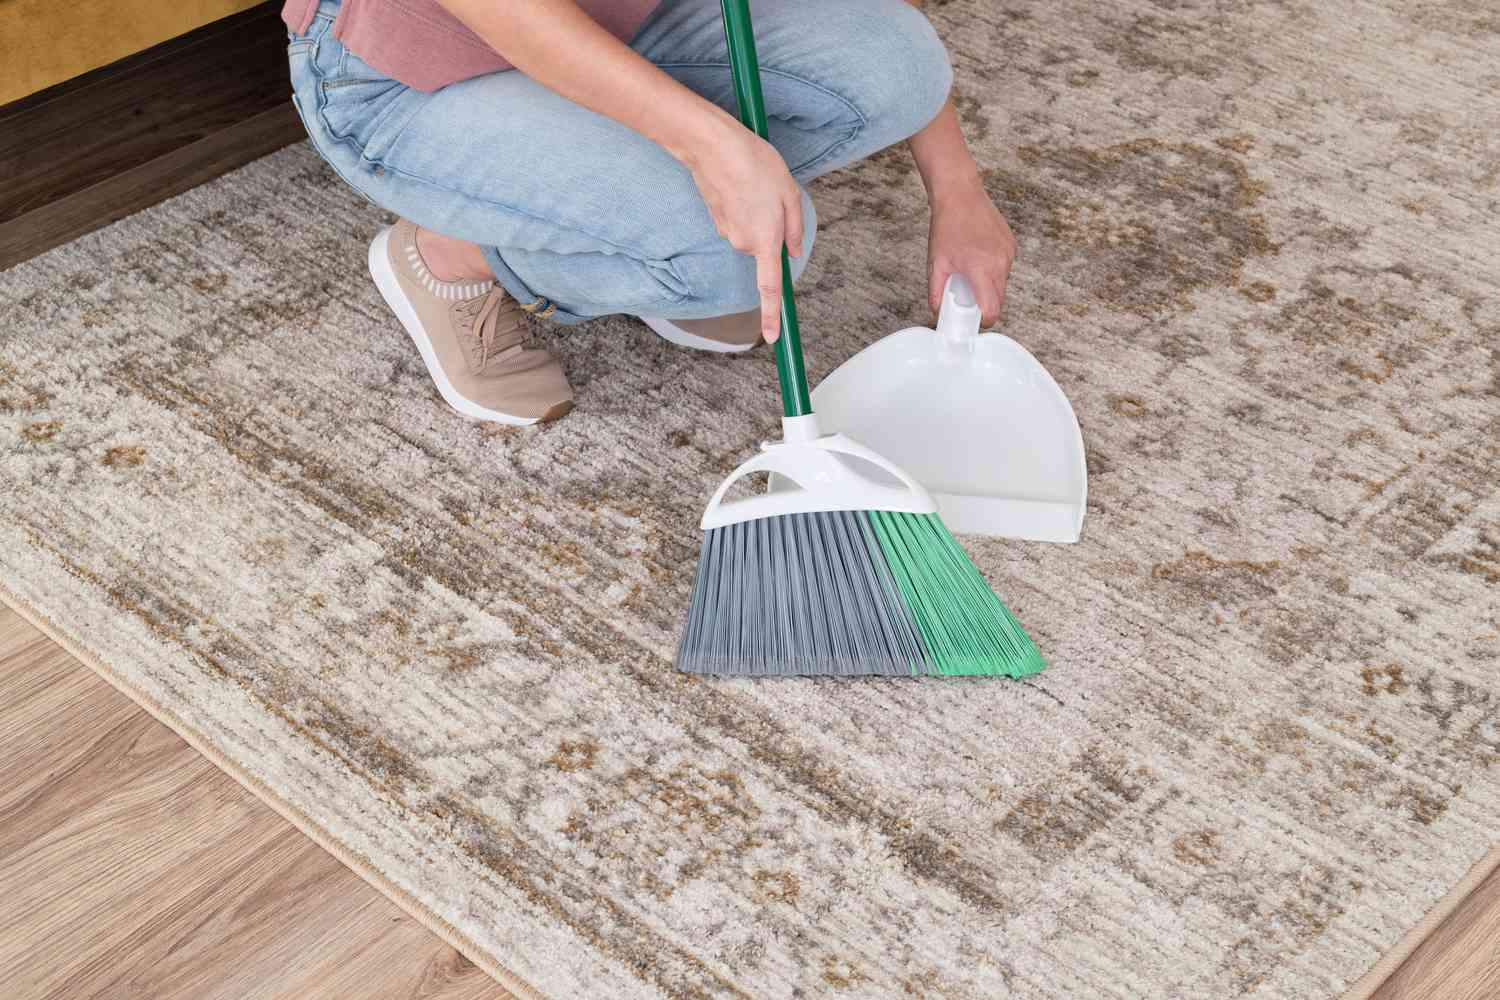 How To Clean Your Rug Without A Carpet Cleaner